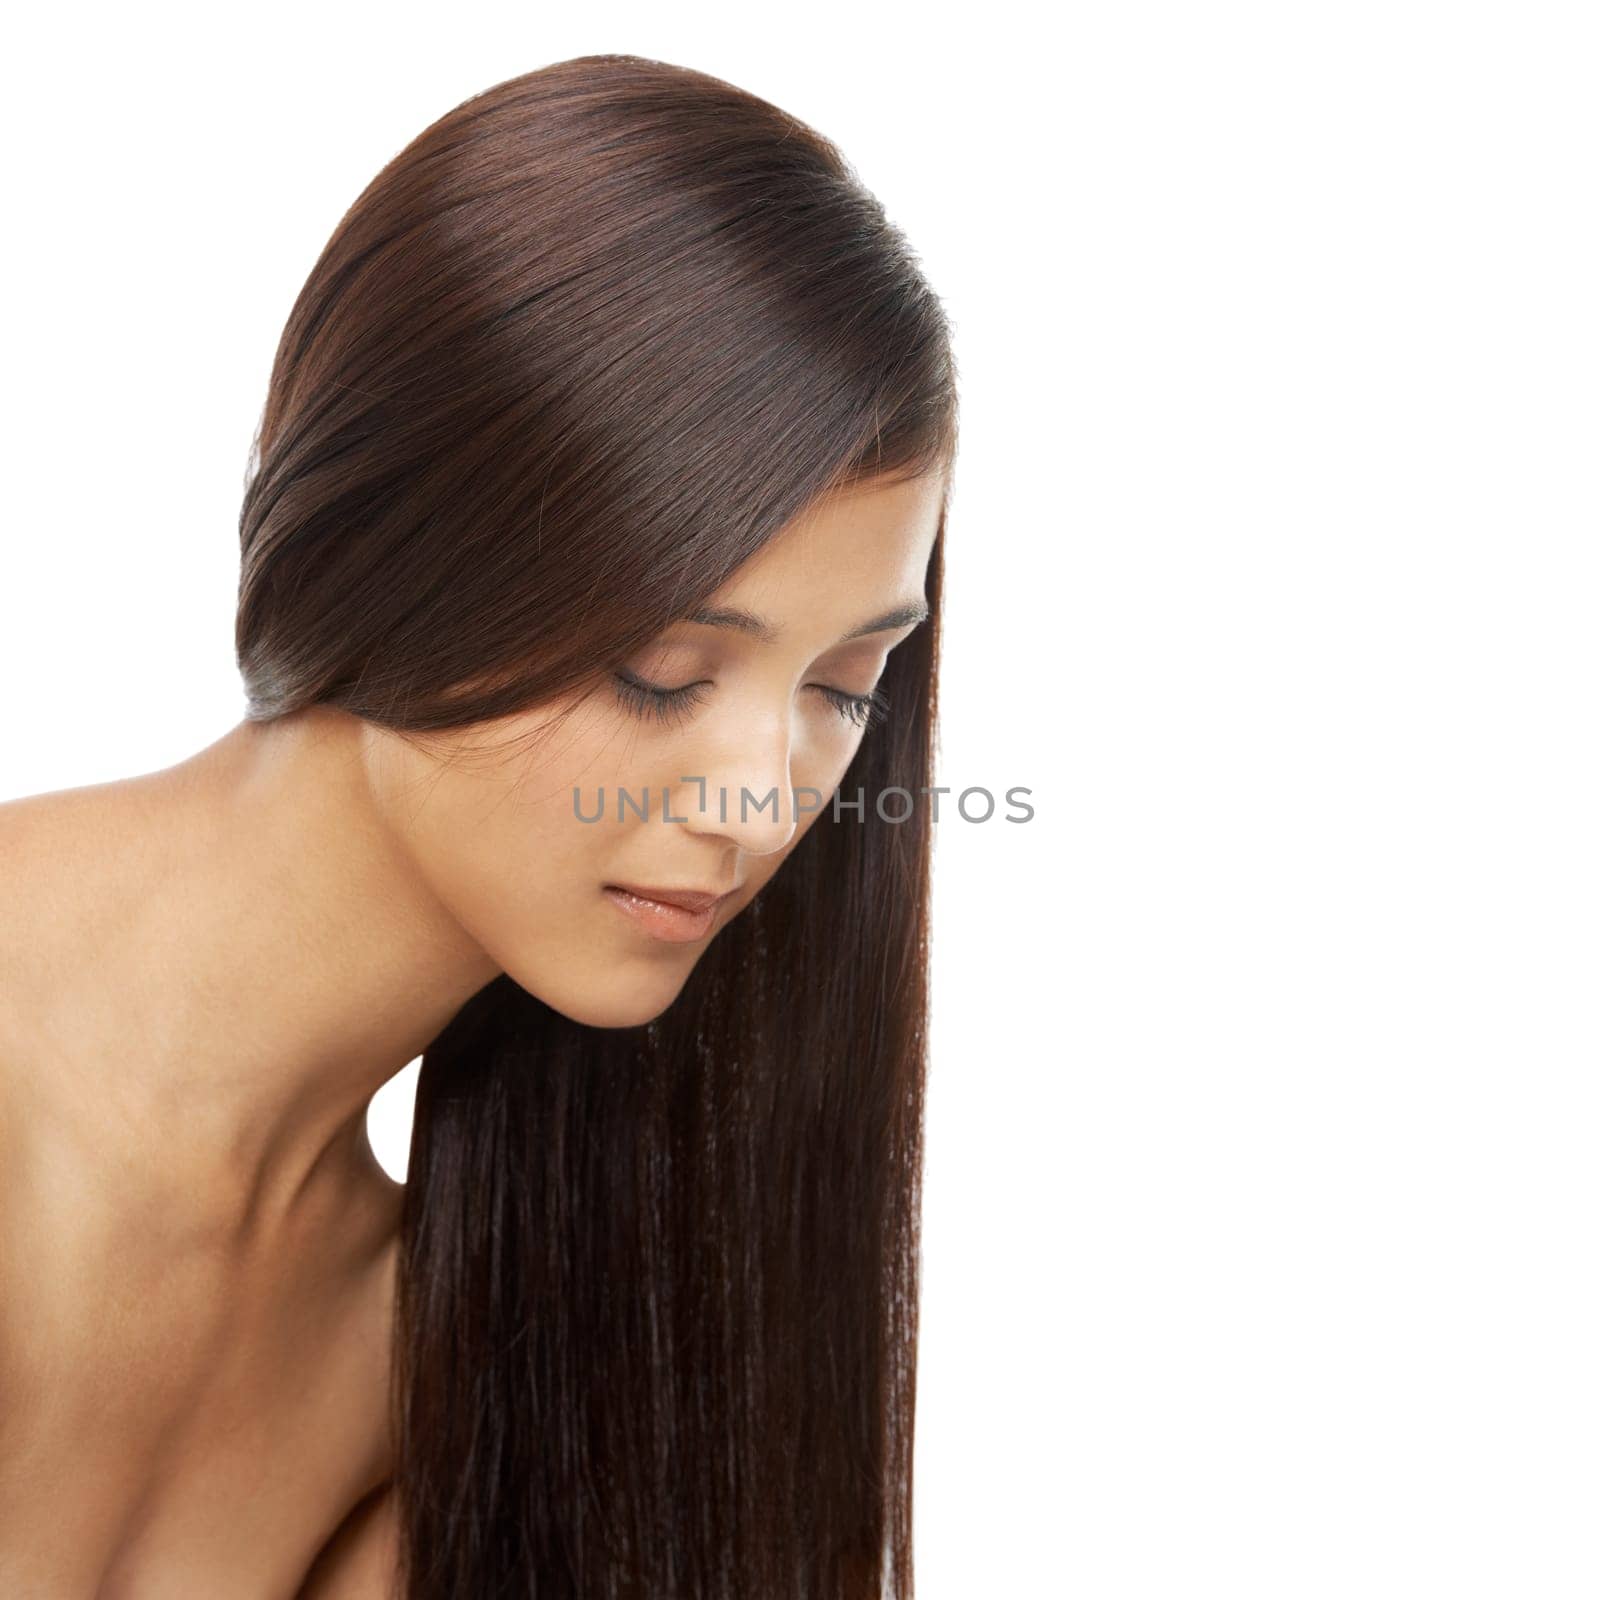 Hair care, woman and face or relax in studio with keratin treatment, soft texture and shampoo shine on mockup. Model, person and beauty with hairstyle ideas, cosmetics and glow on white background.